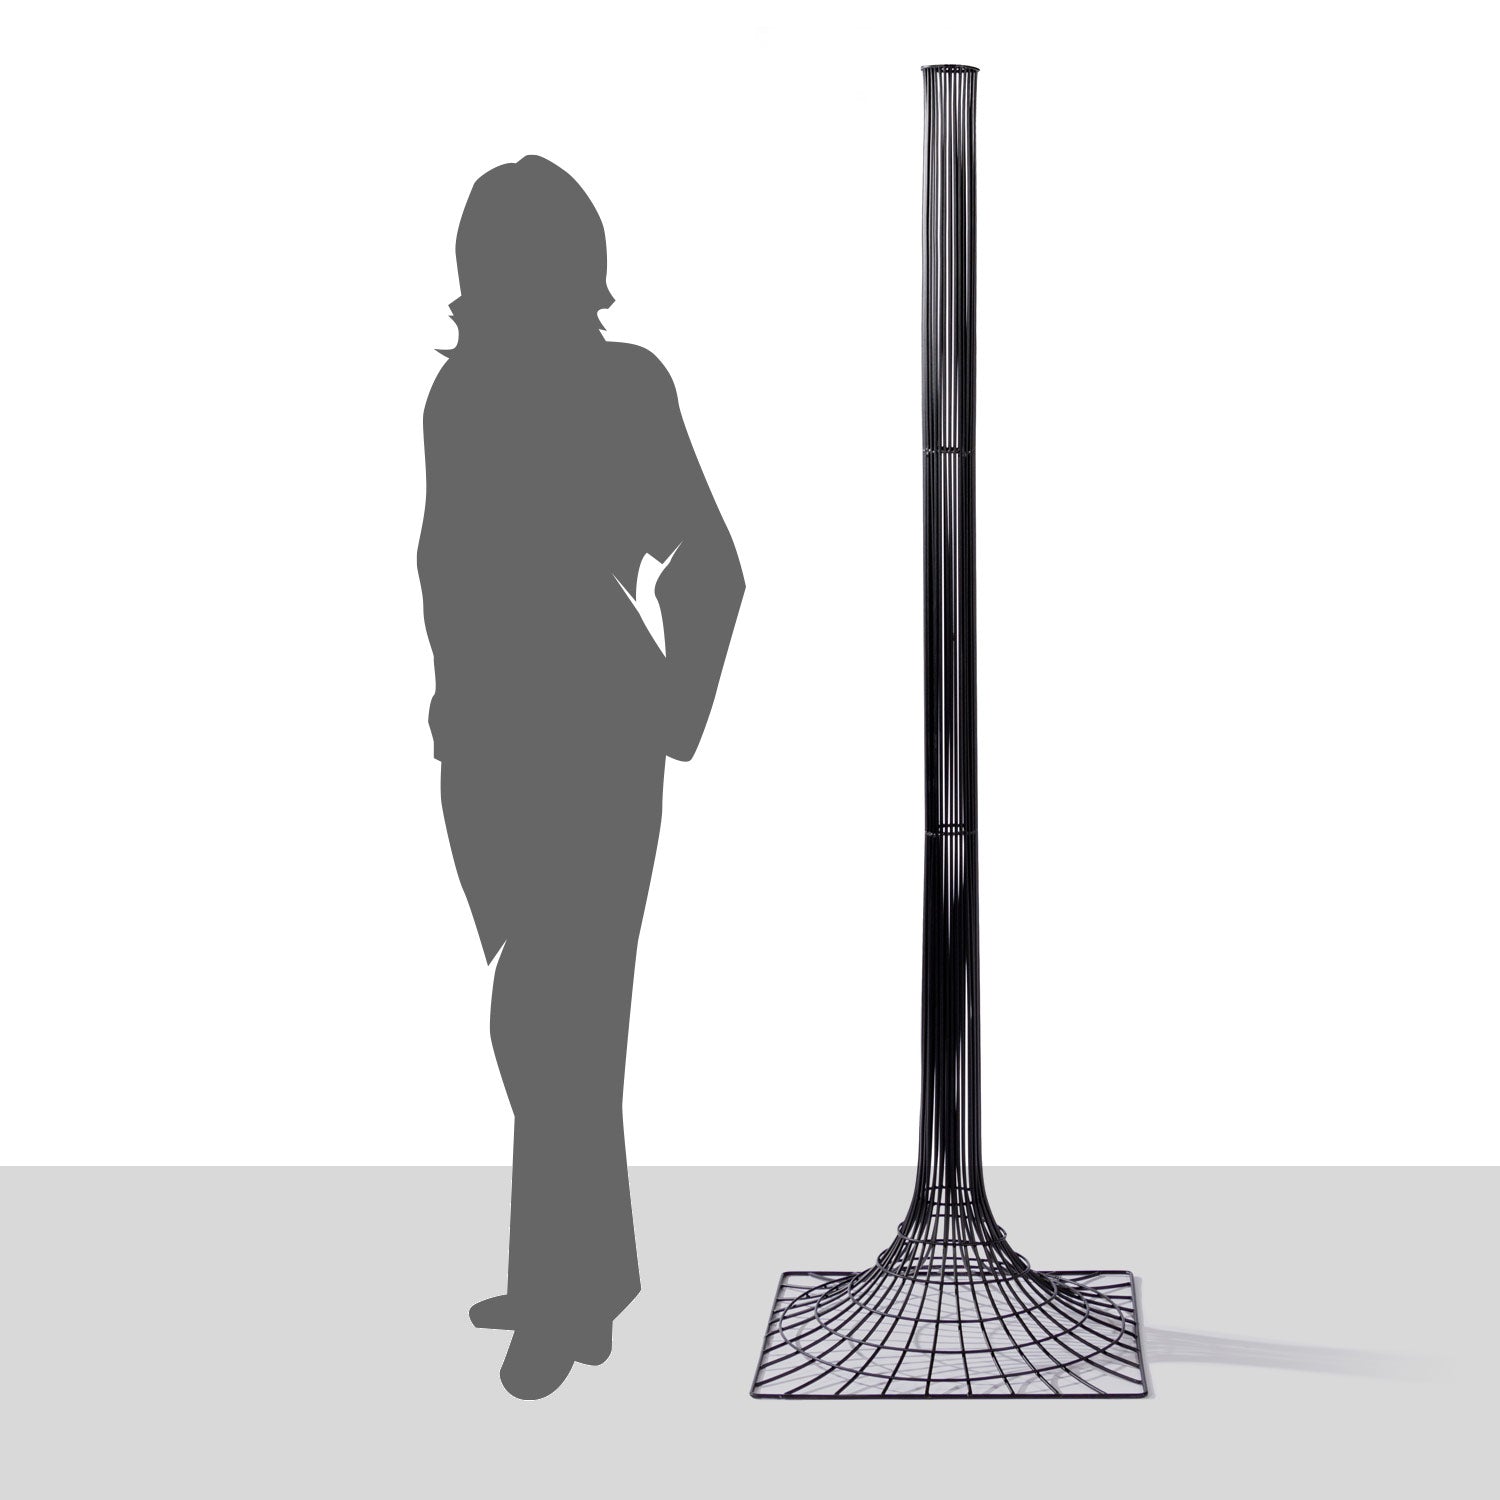 Black Iron Vortex floor sculpture with a silhouette of a person as reference.